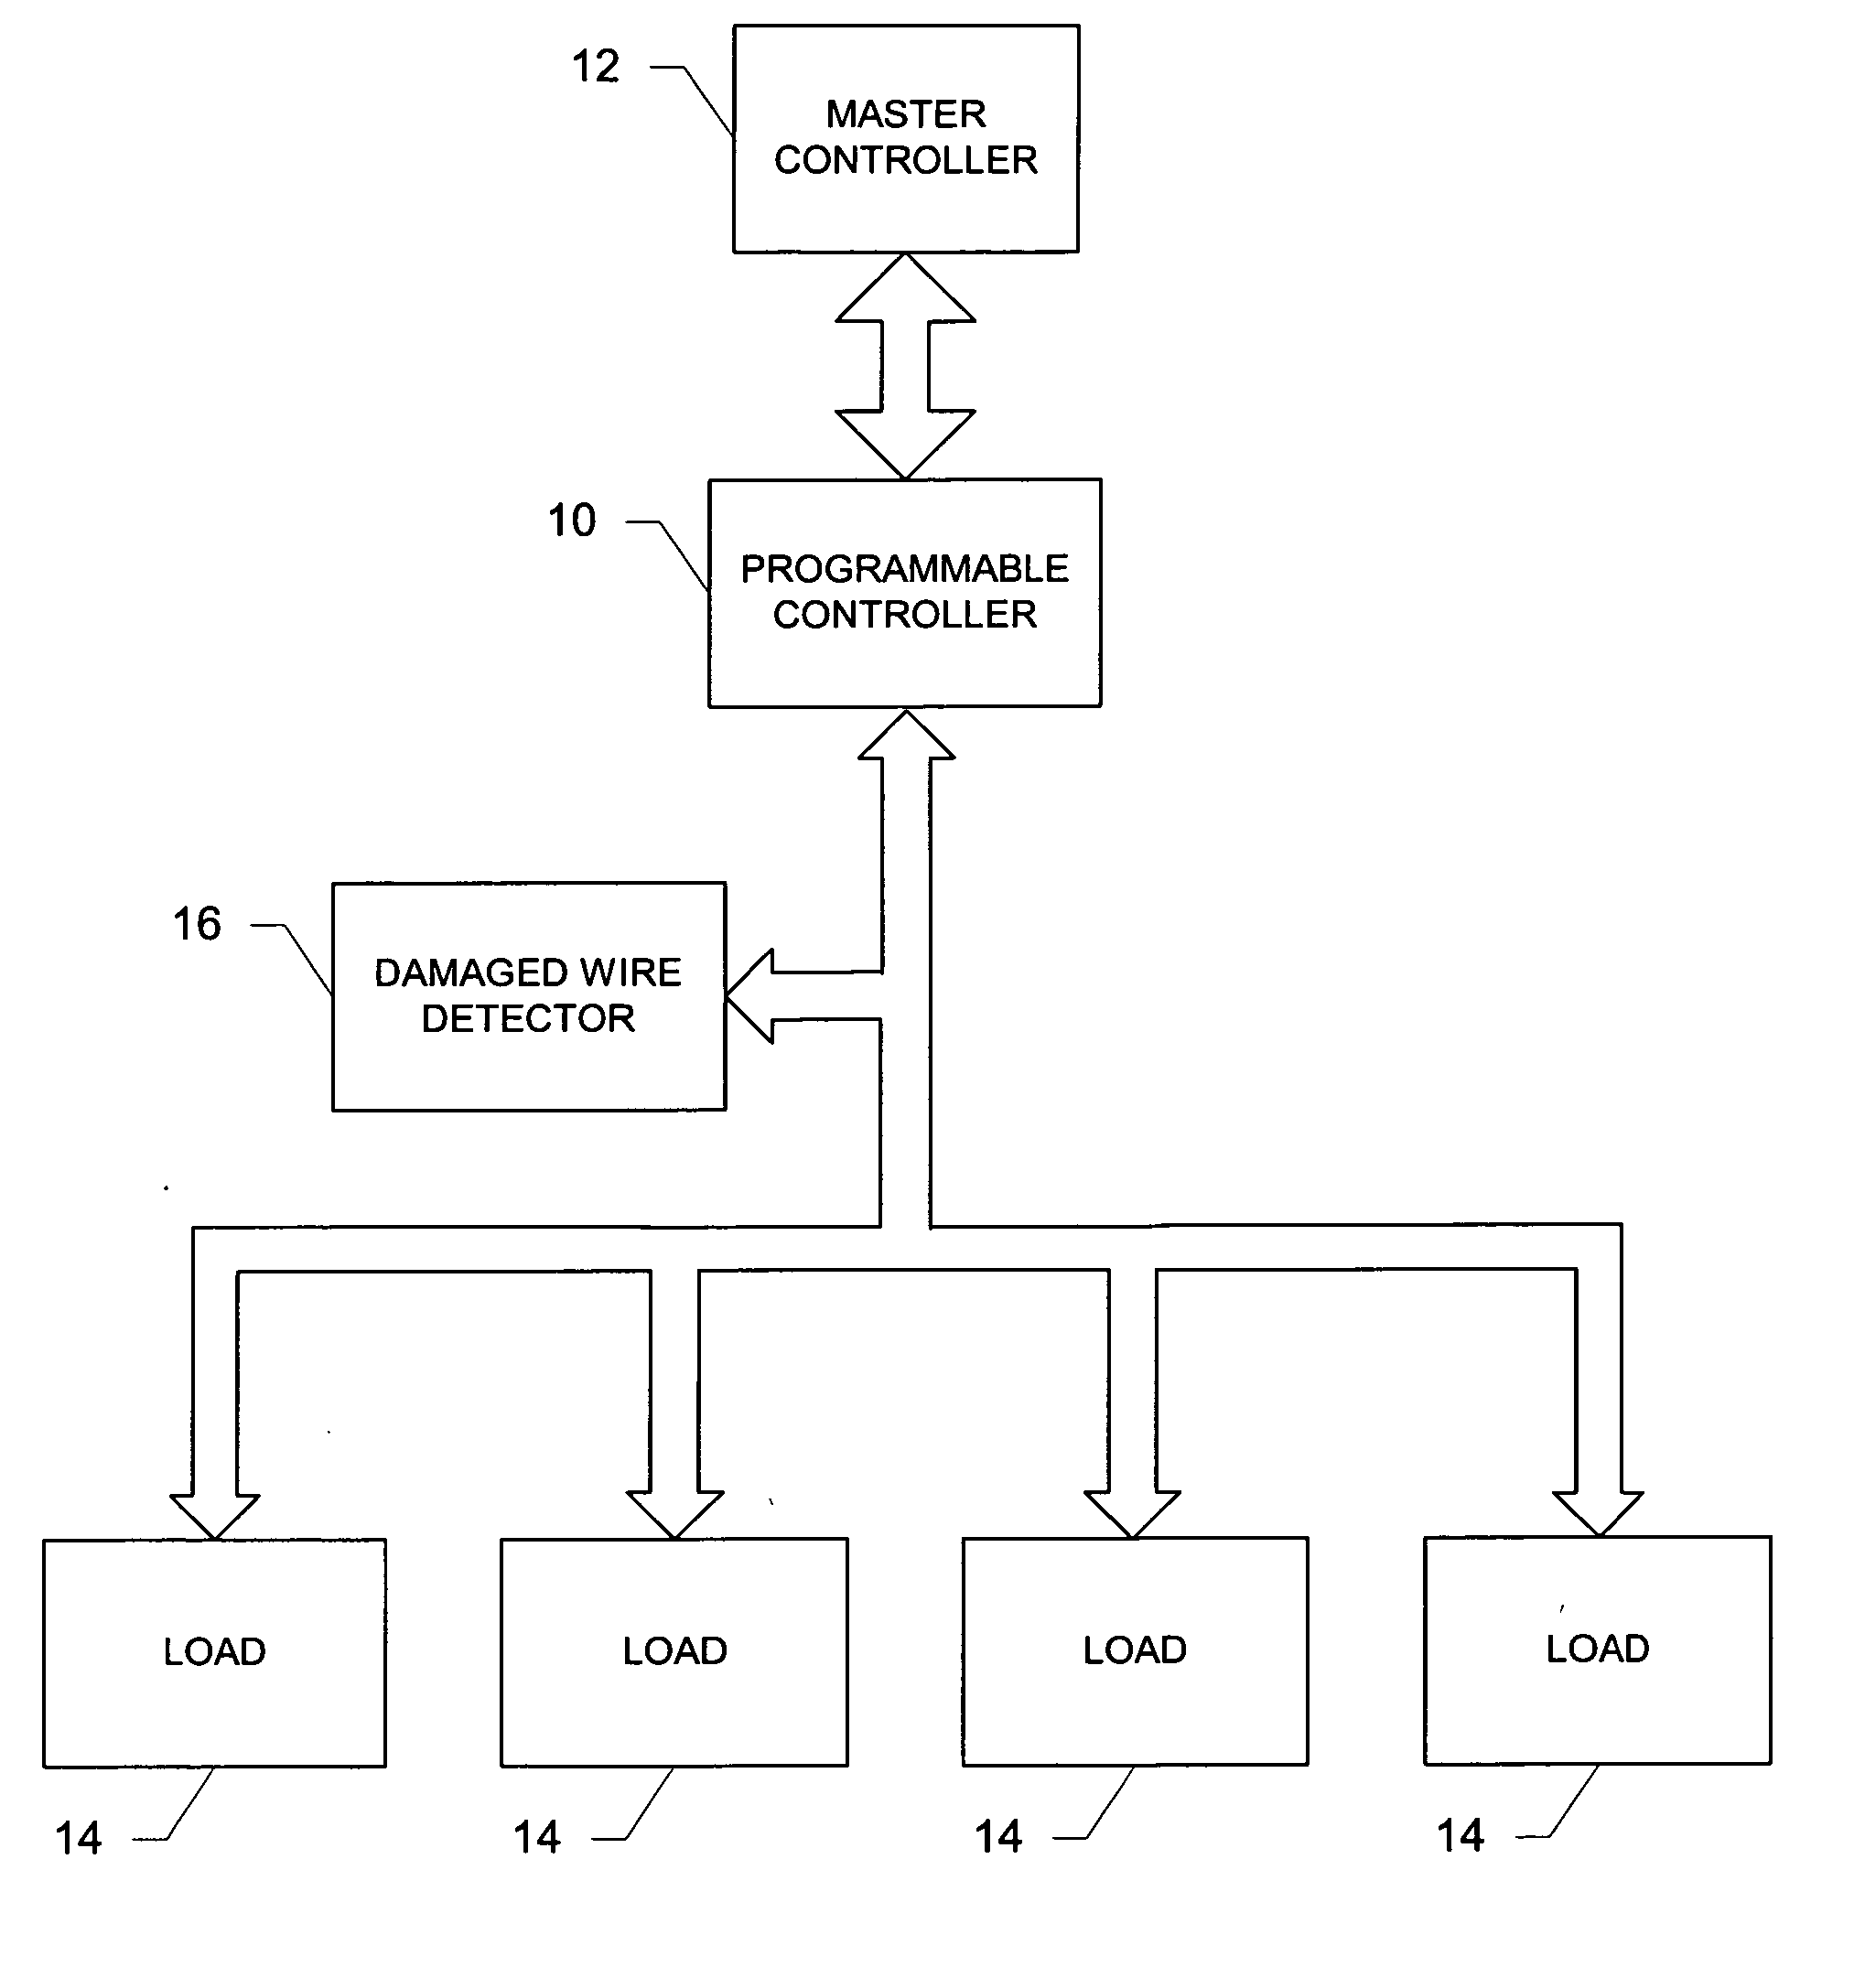 System and method for remotely detecting and locating damaged conductors in a power system